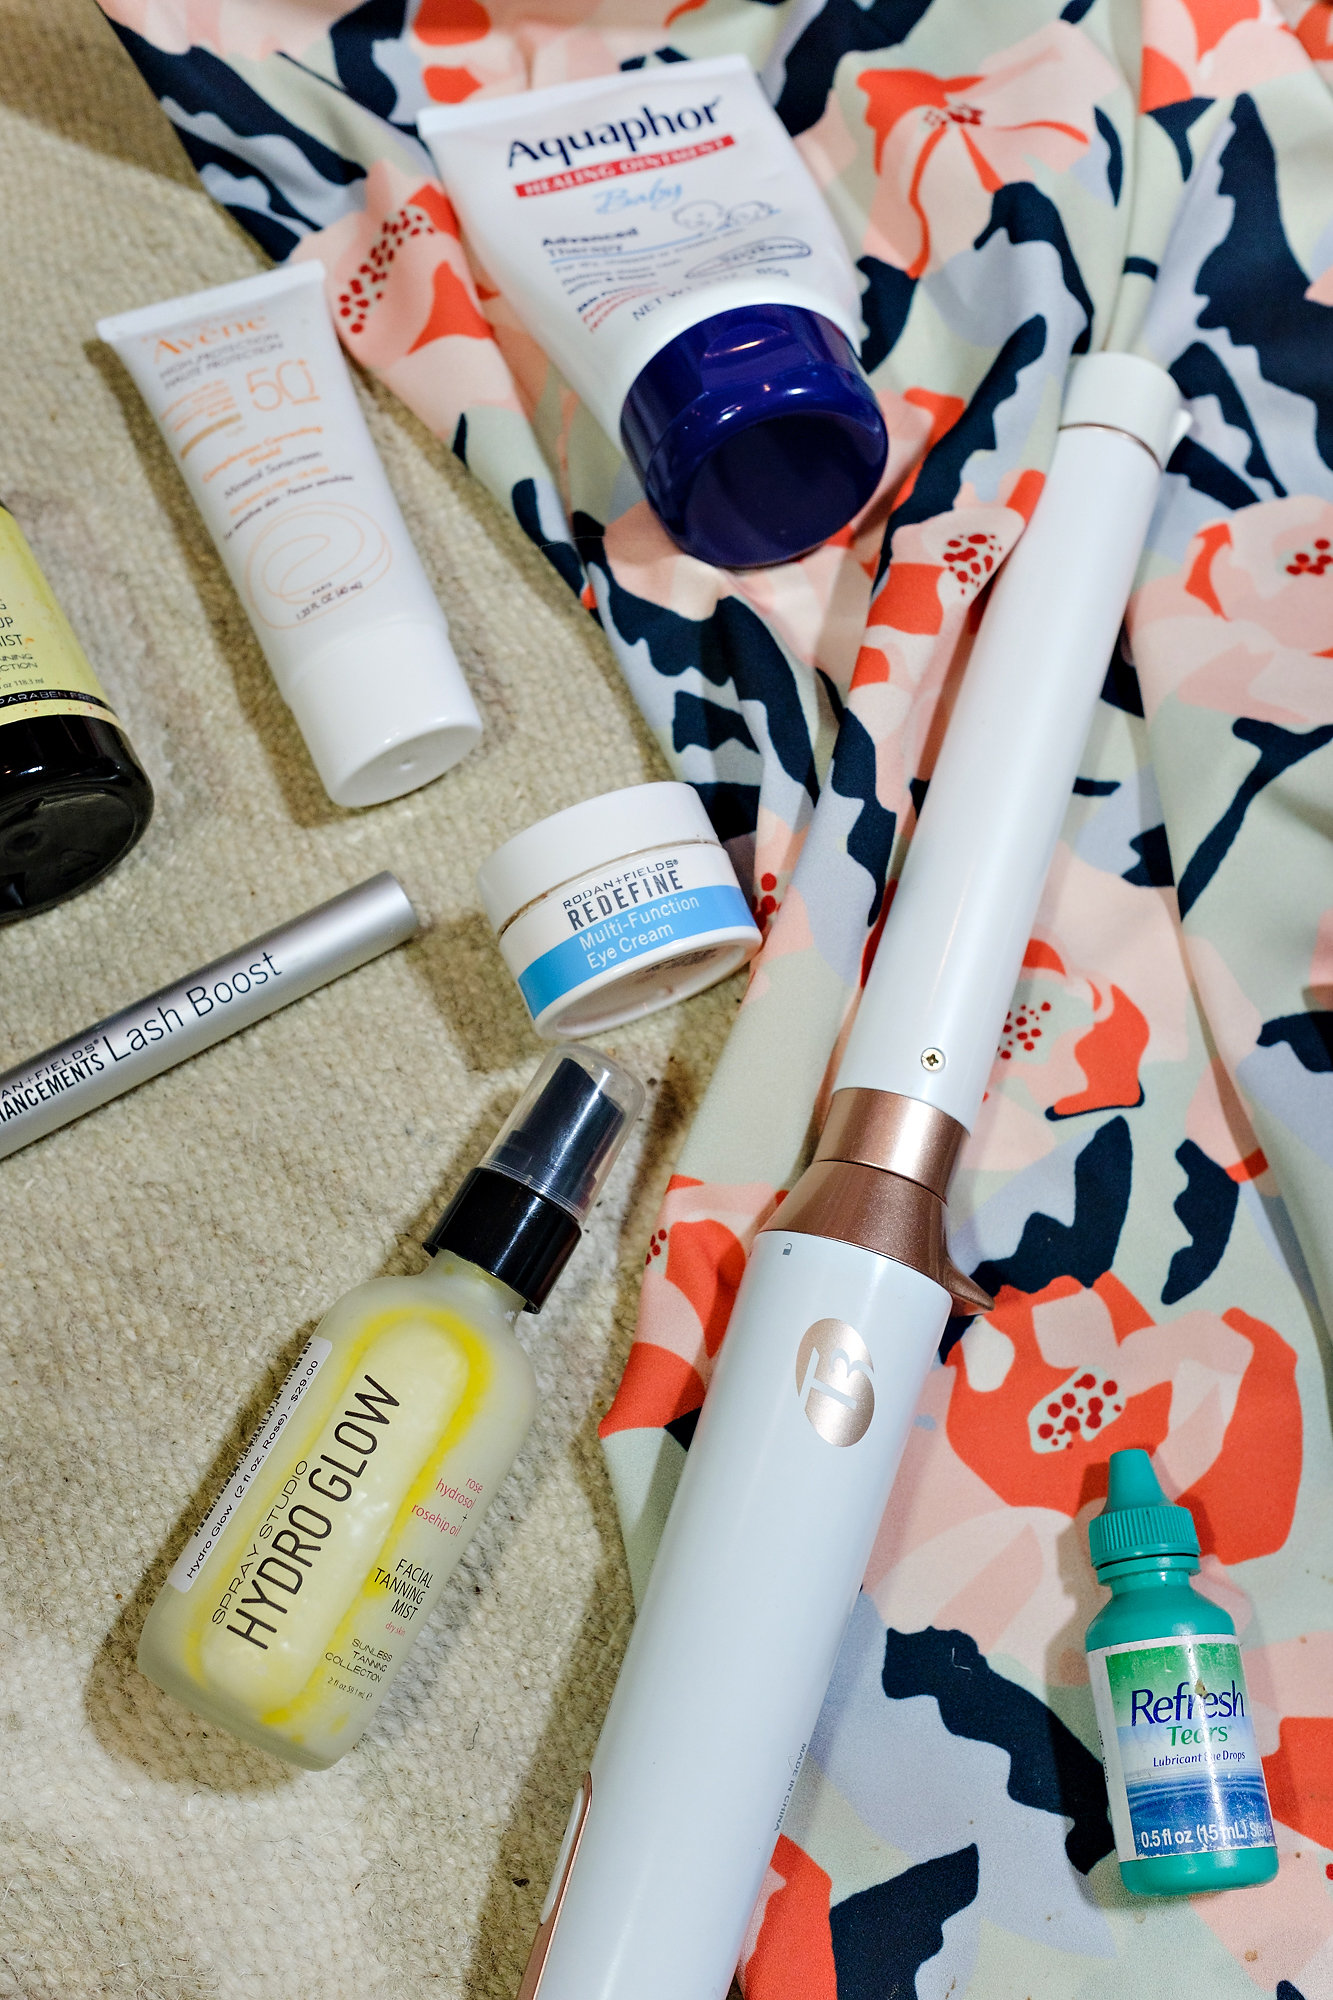 My 9 Beauty Travel Must Haves by Atlanta blogger Jessica of Happily Hughes